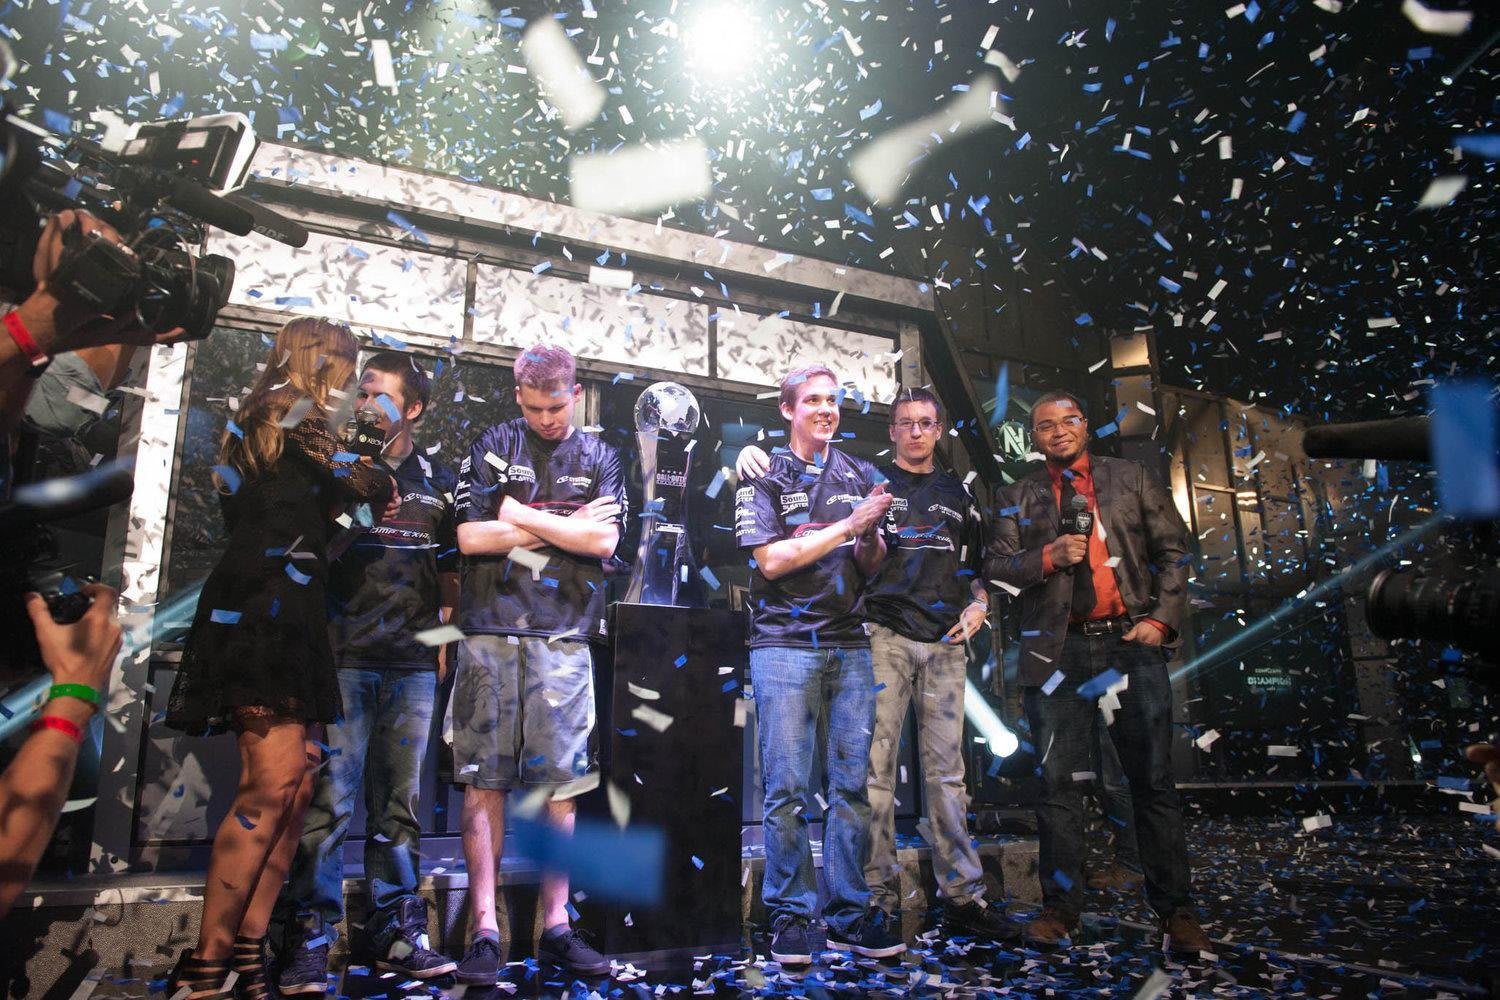 Call of Duty World Championship date set for March